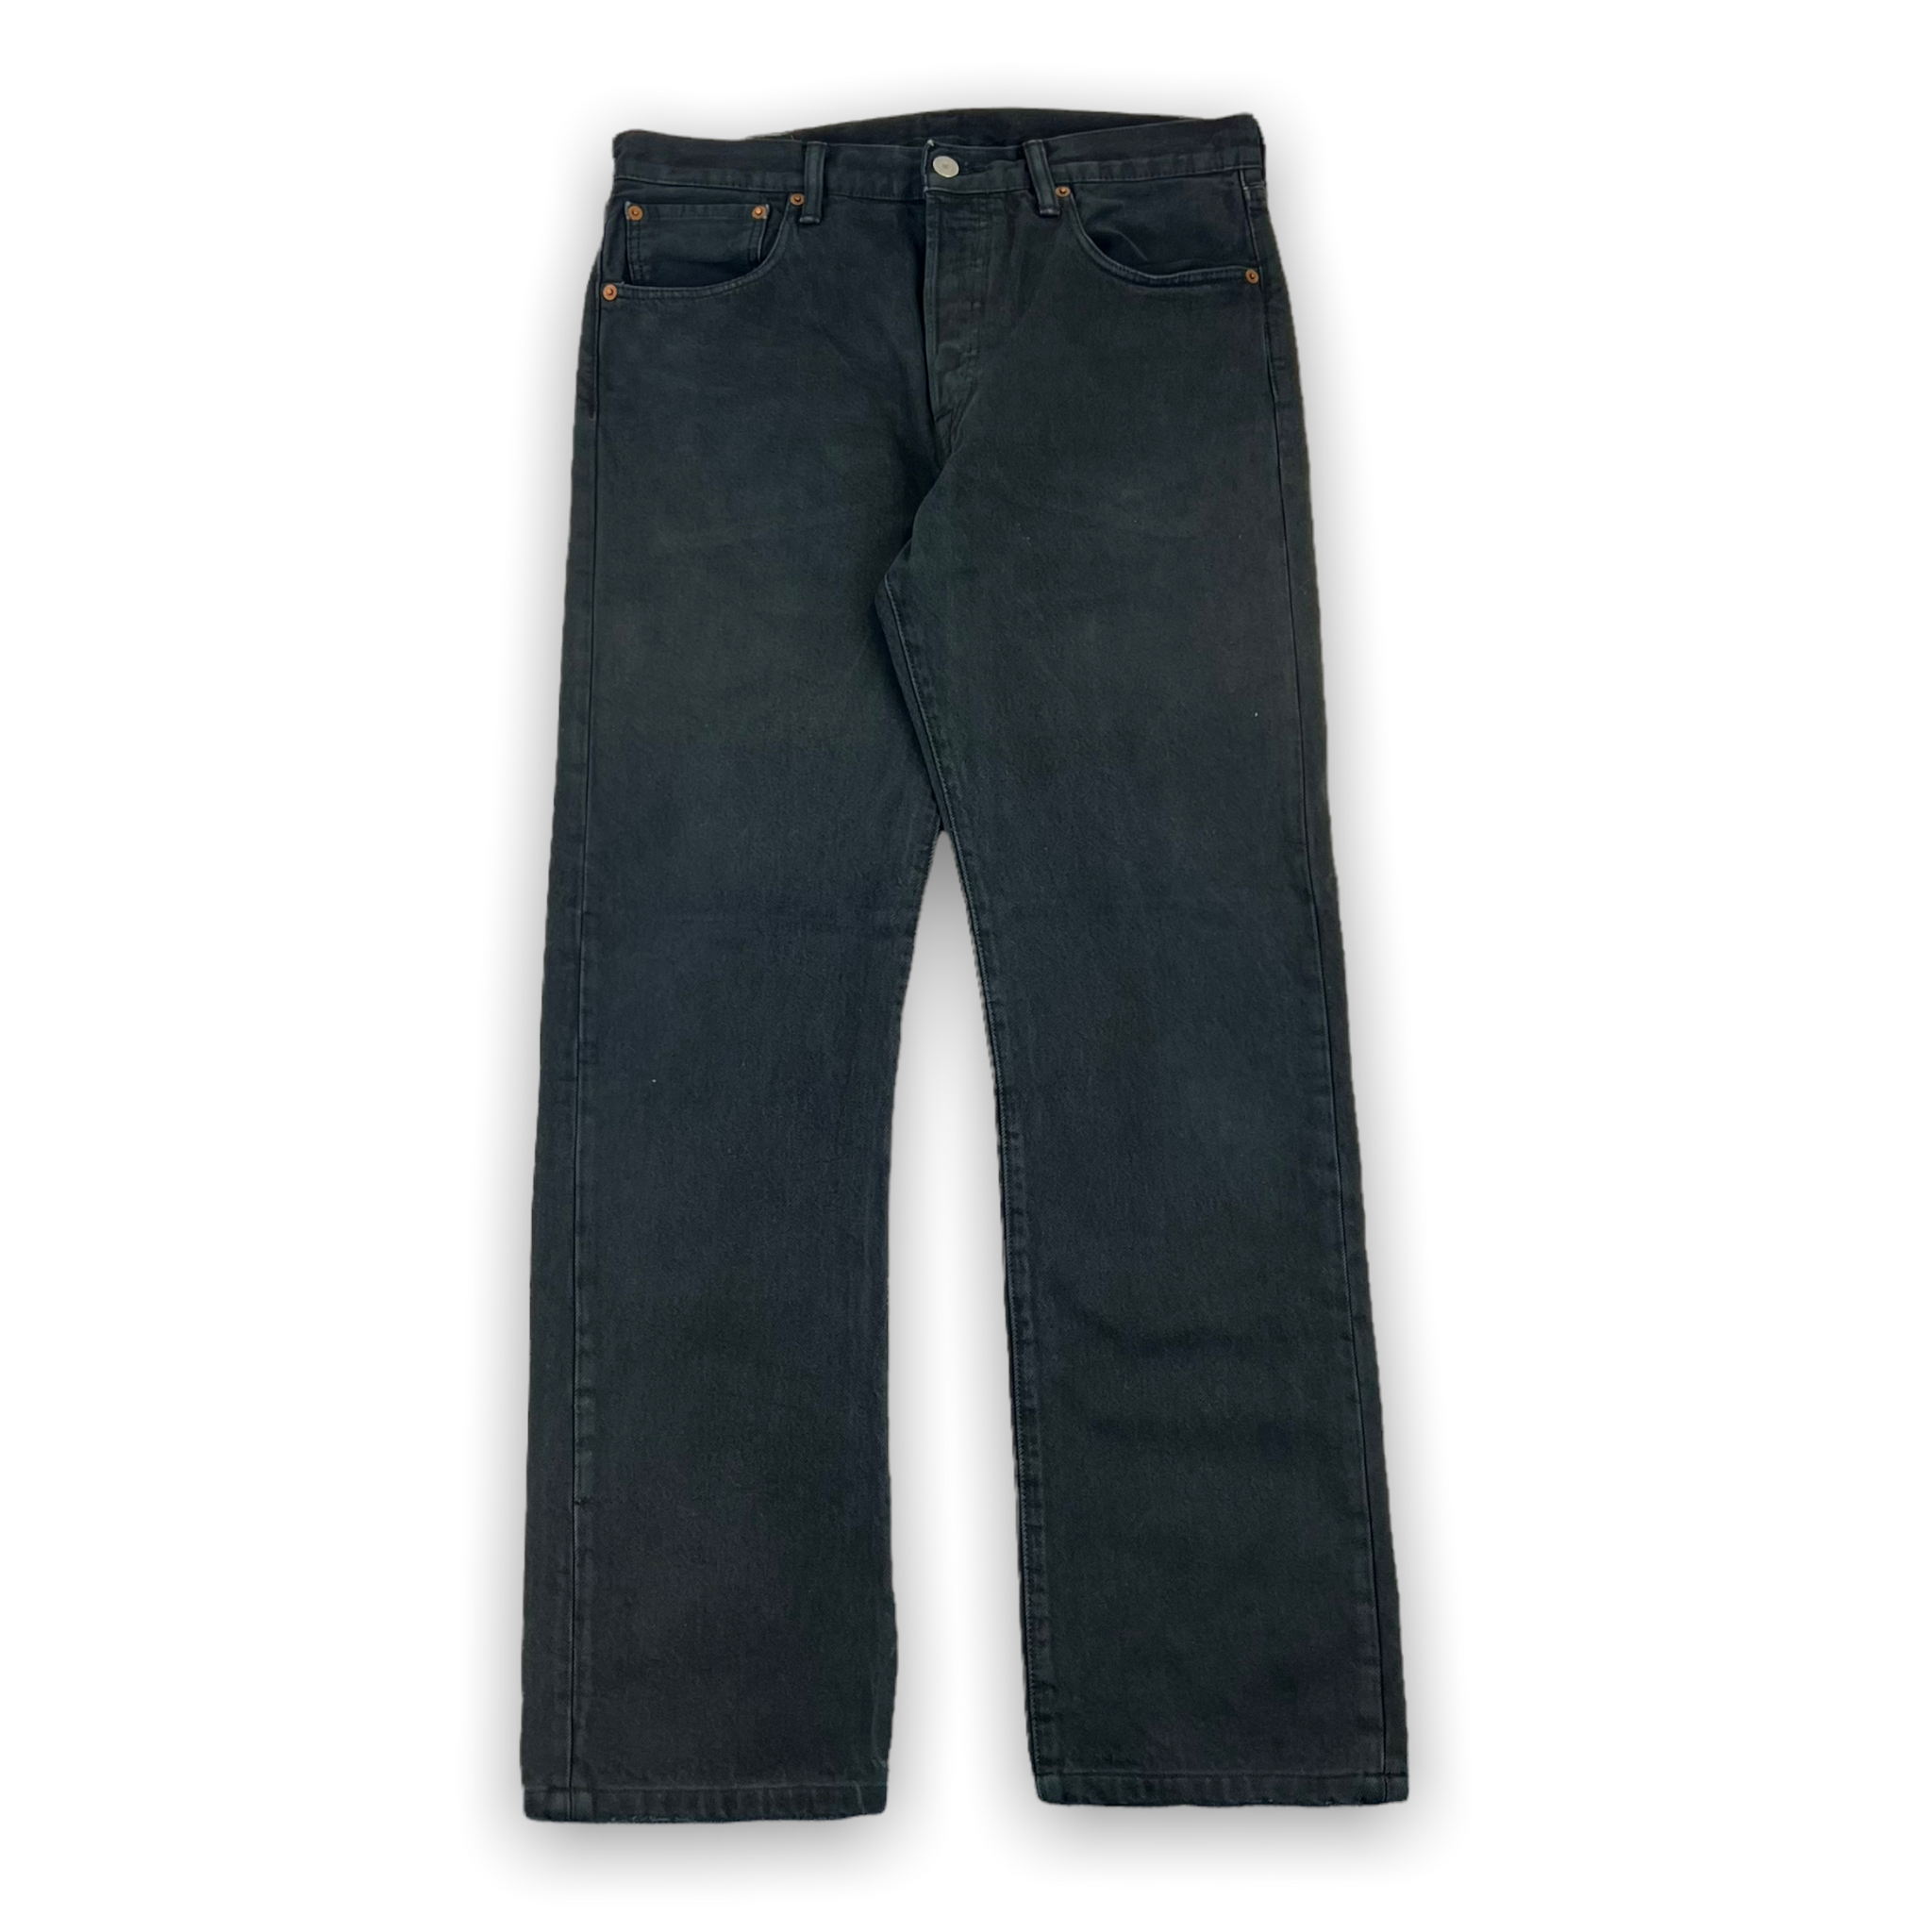 Levi's 501 Jeans size 33 – The Preloved Hype Store